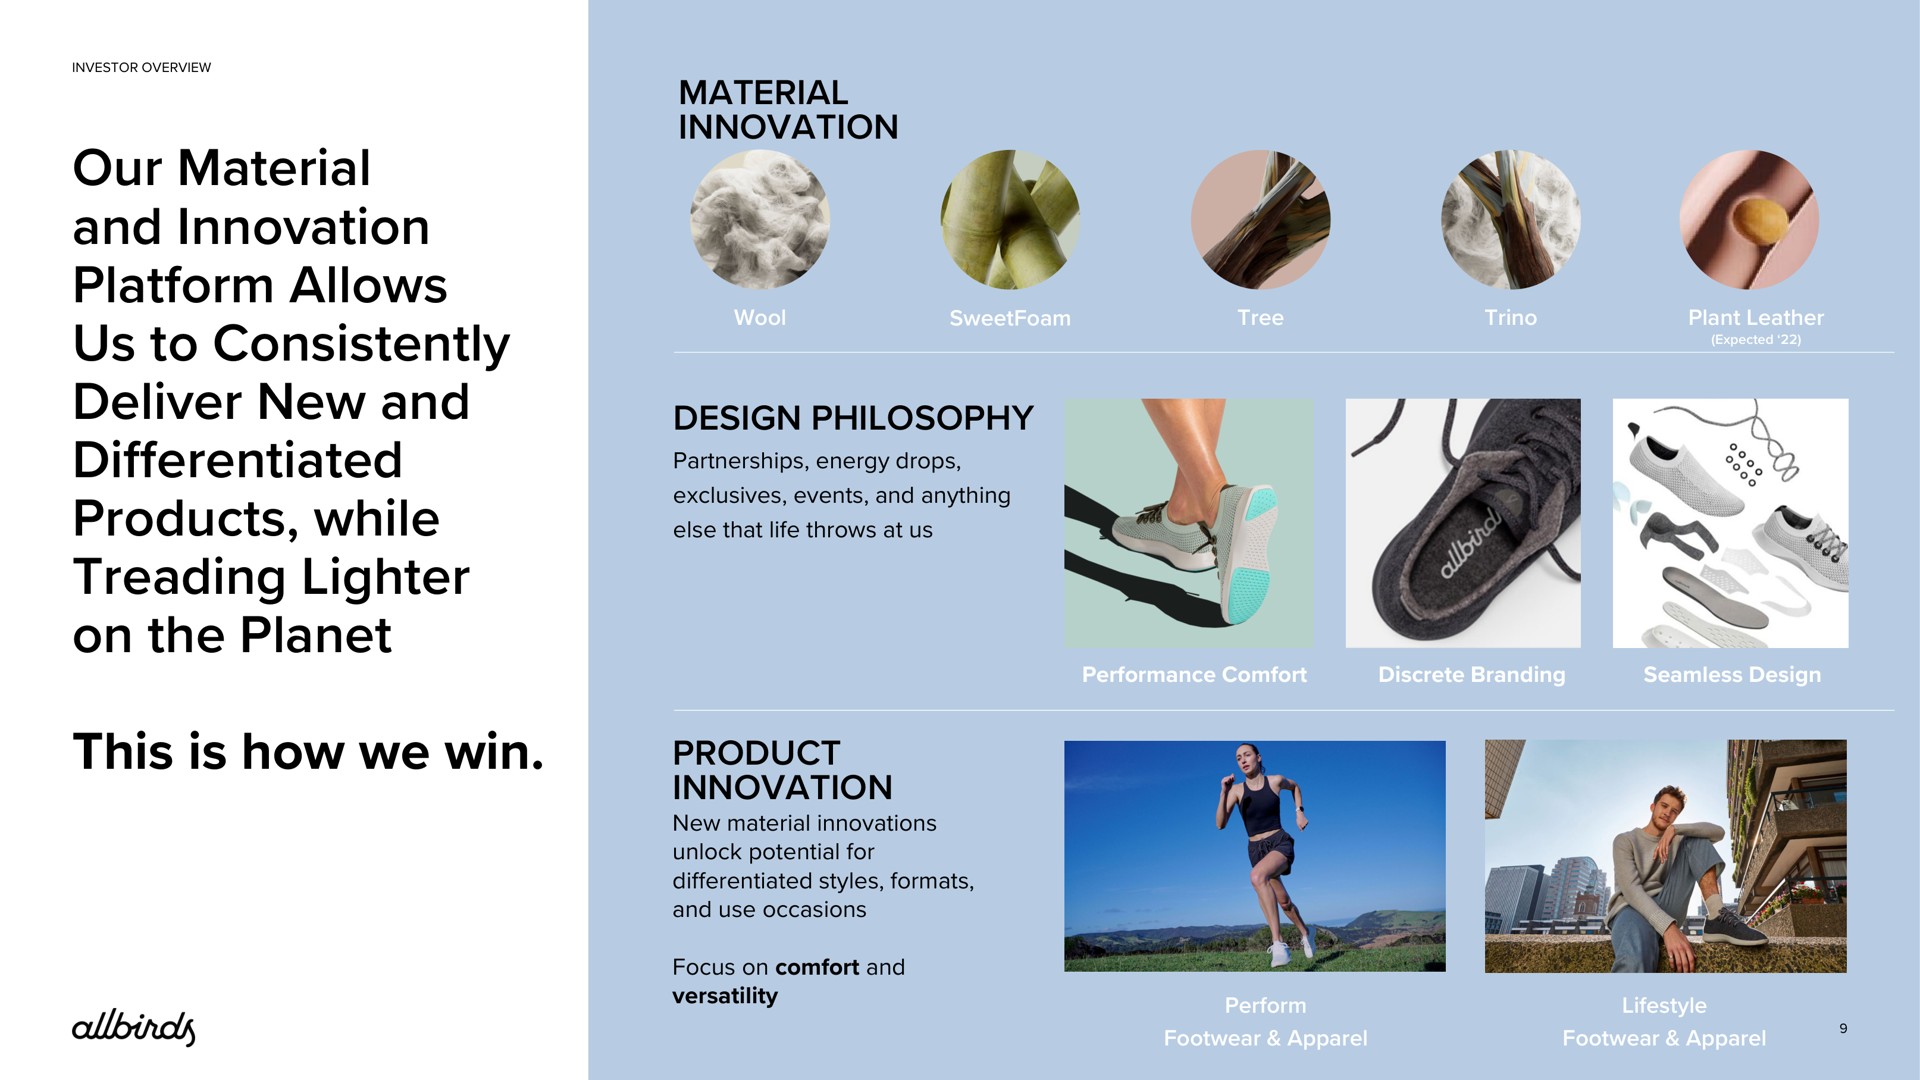 our material and innovation platform allows us to consistently deliver new and differentiated products while treading lighter on the planet this is how we win material innovation design philosophy product innovation i he a | Allbirds